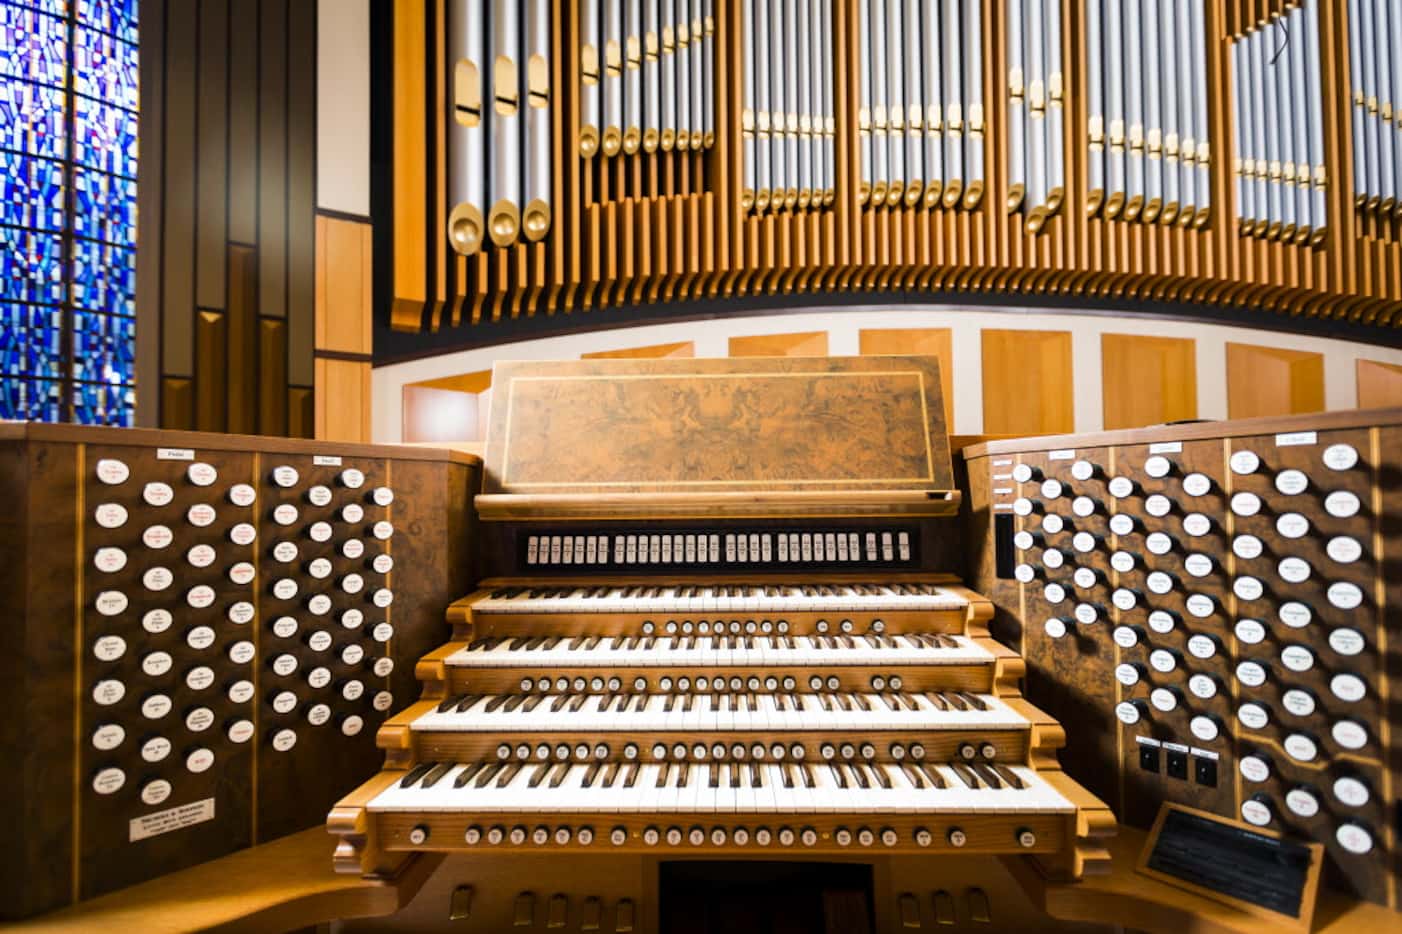 The console and case of the pipe organ at St. Monica Catholic Church in Dallas.  